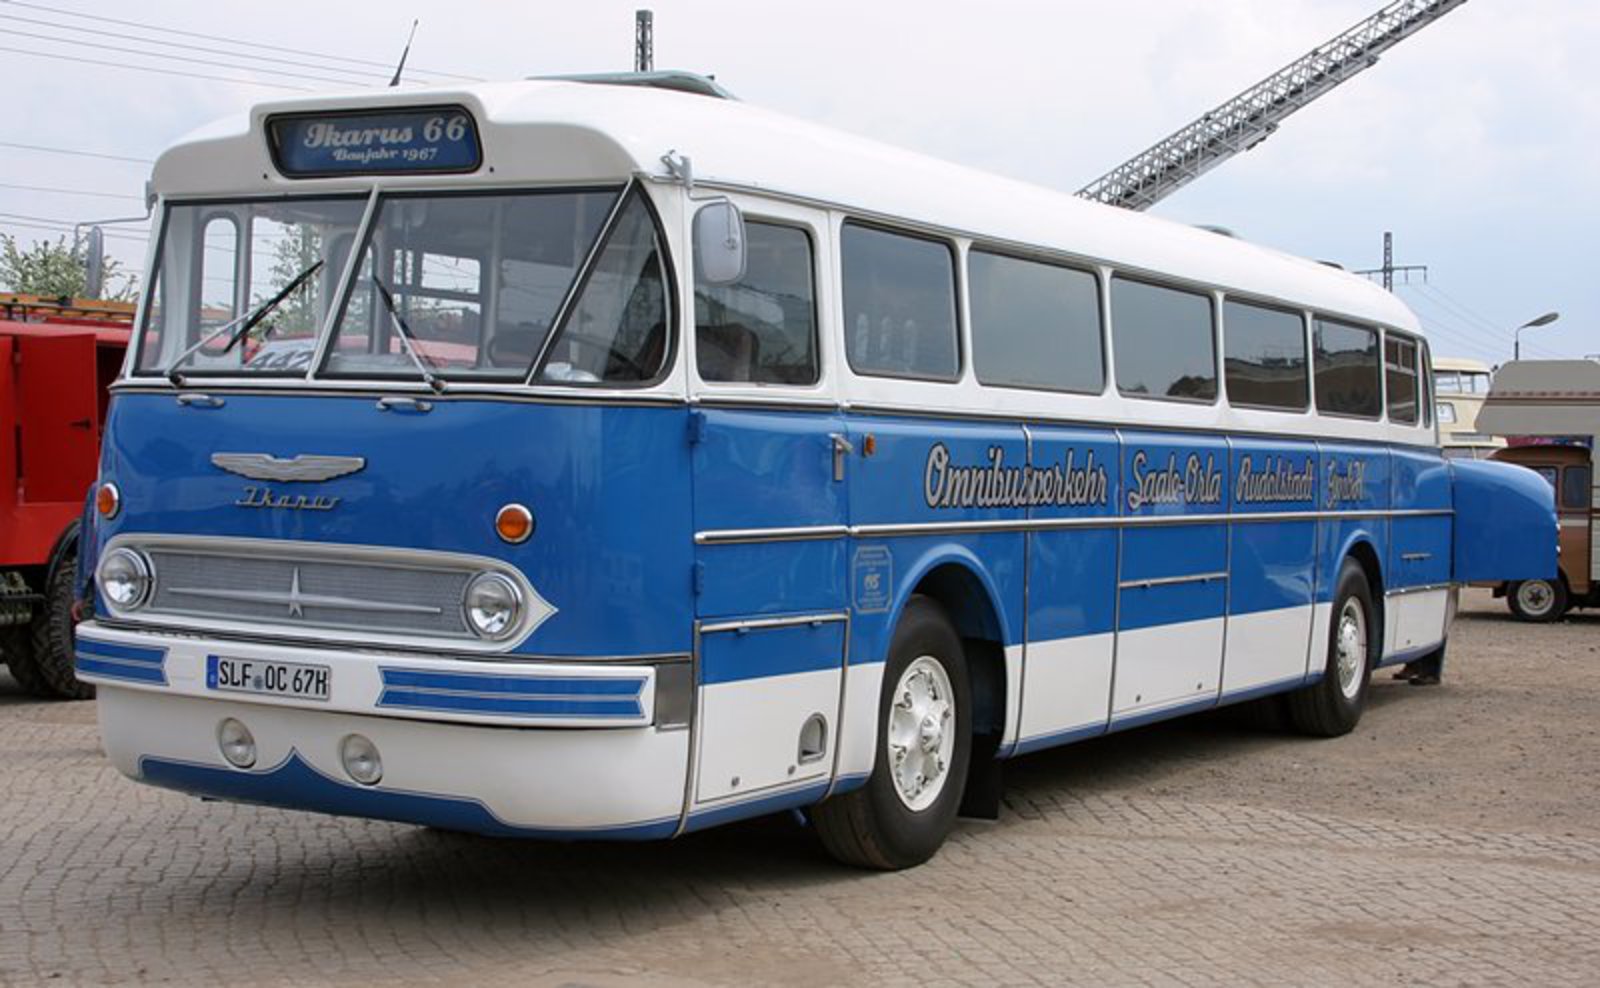 Ikarus 66: Photo gallery, complete information about model ...